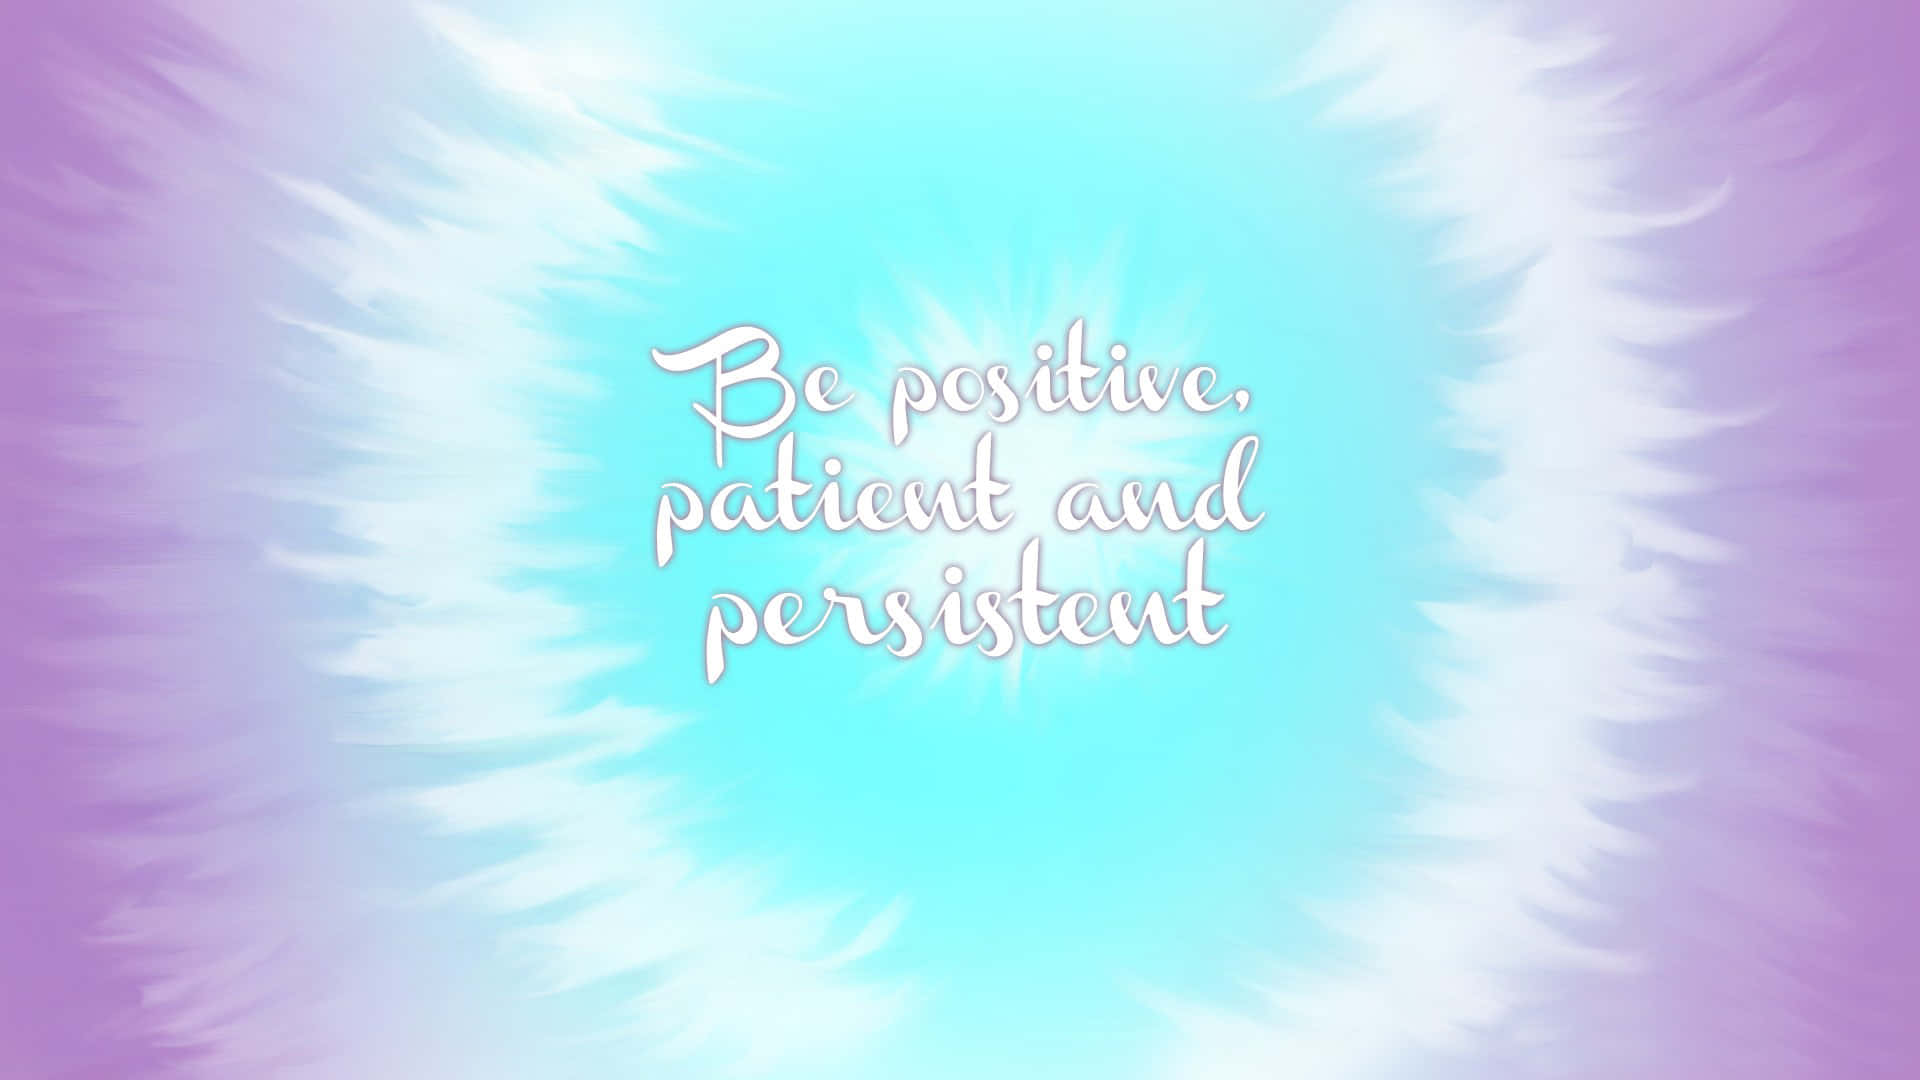 Find the positivity in everything and your life will be filled with joy Wallpaper